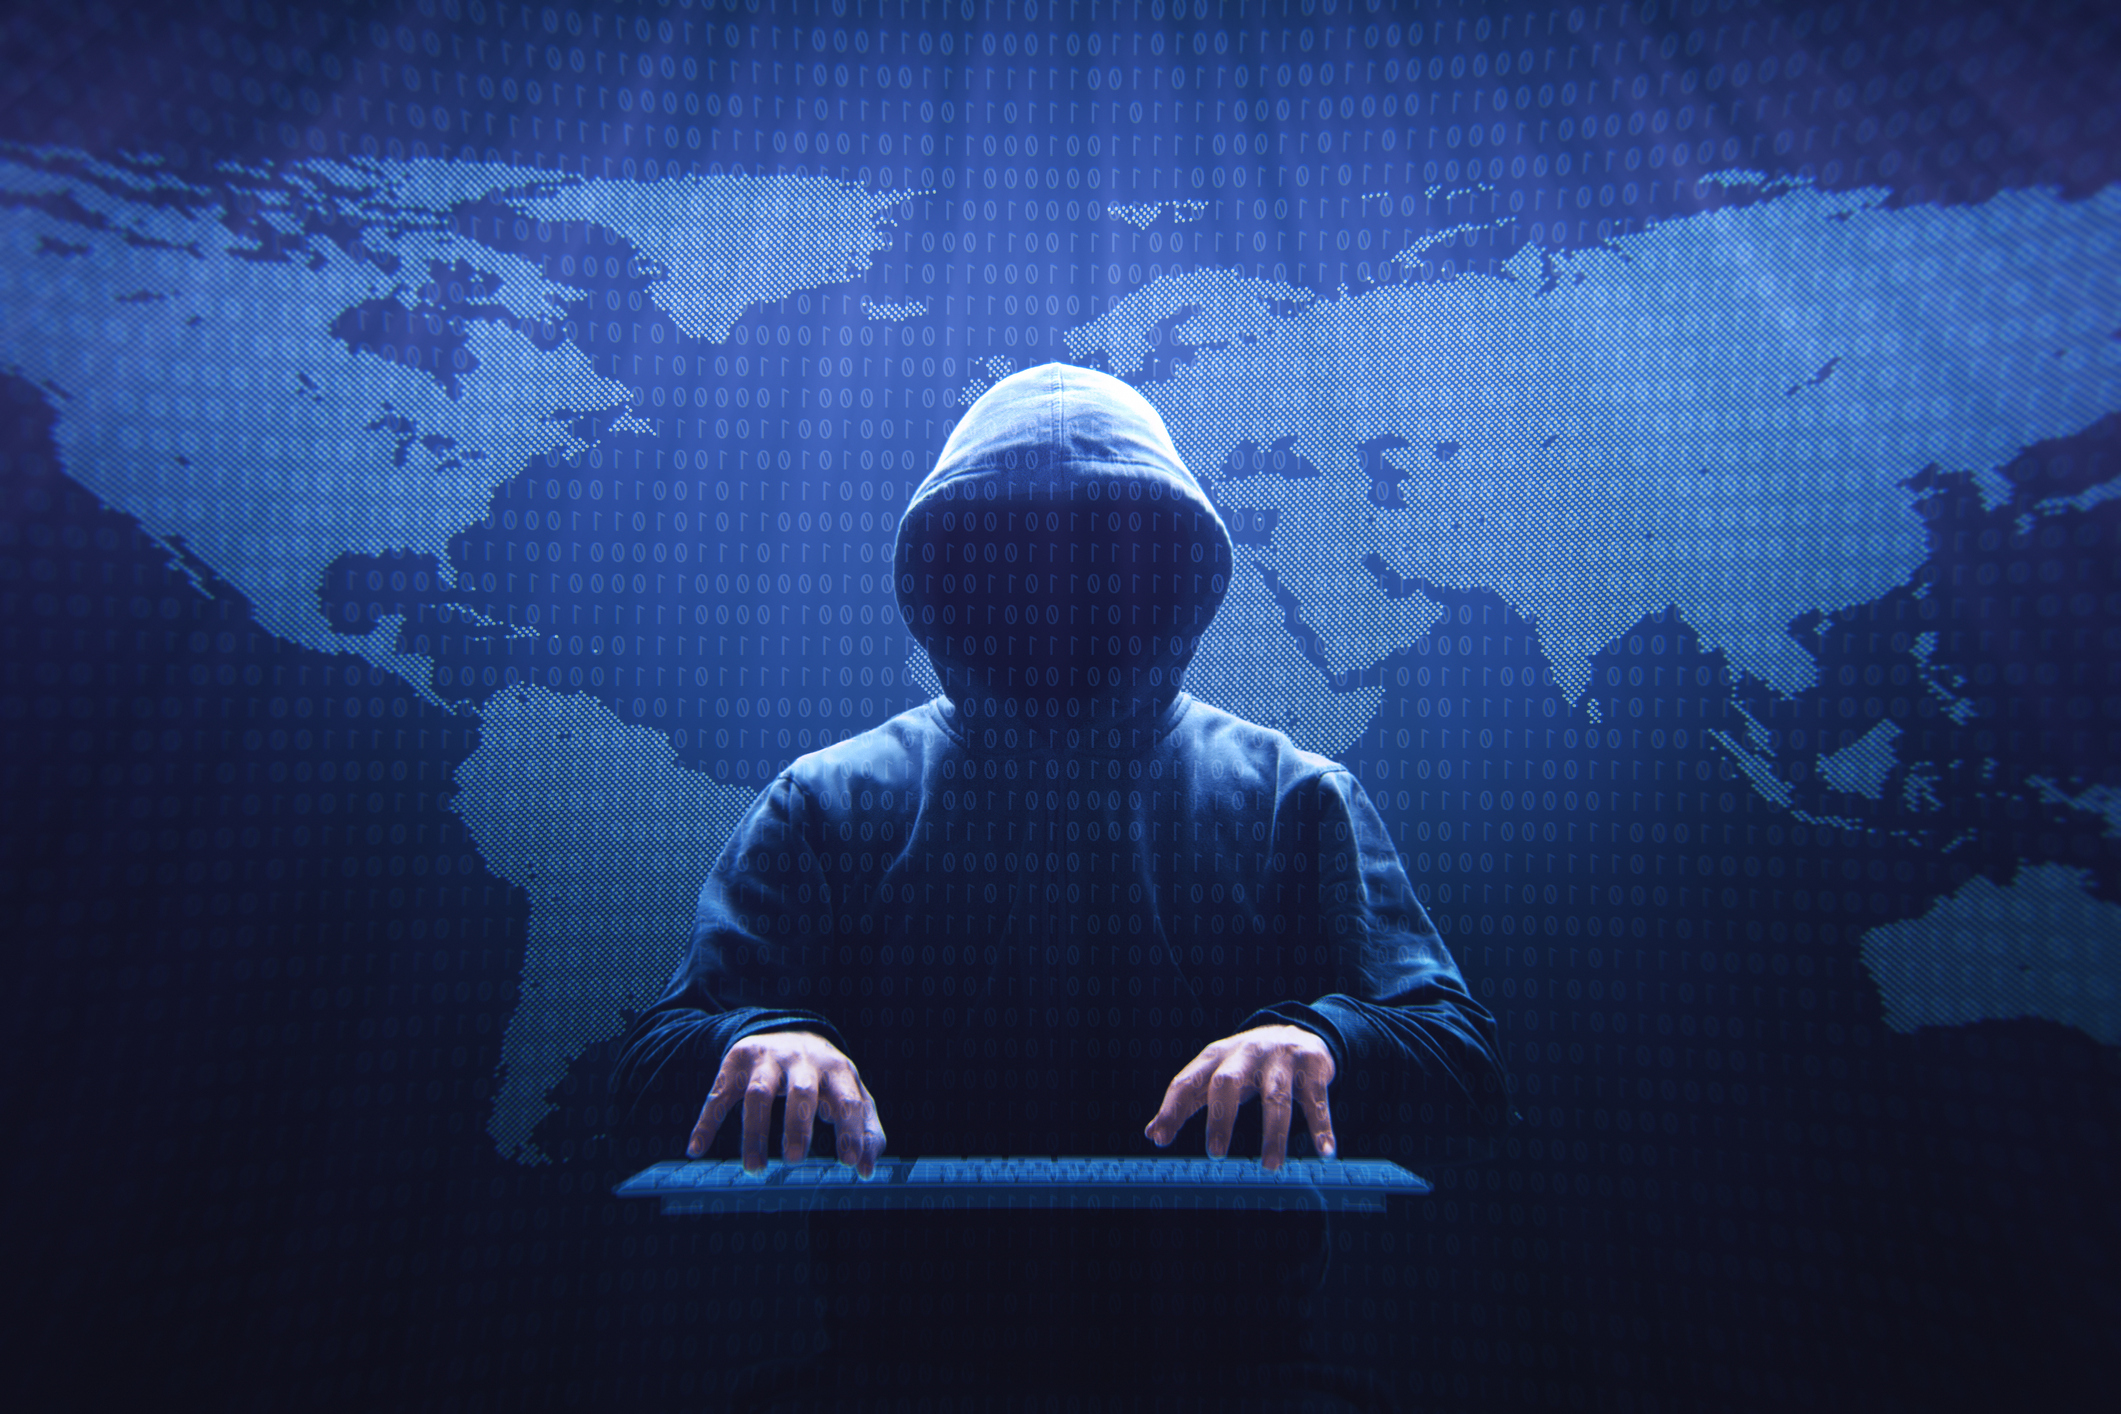 Foreign hackers have been nestling in U.S. critical infrastructure for years – Panda Security